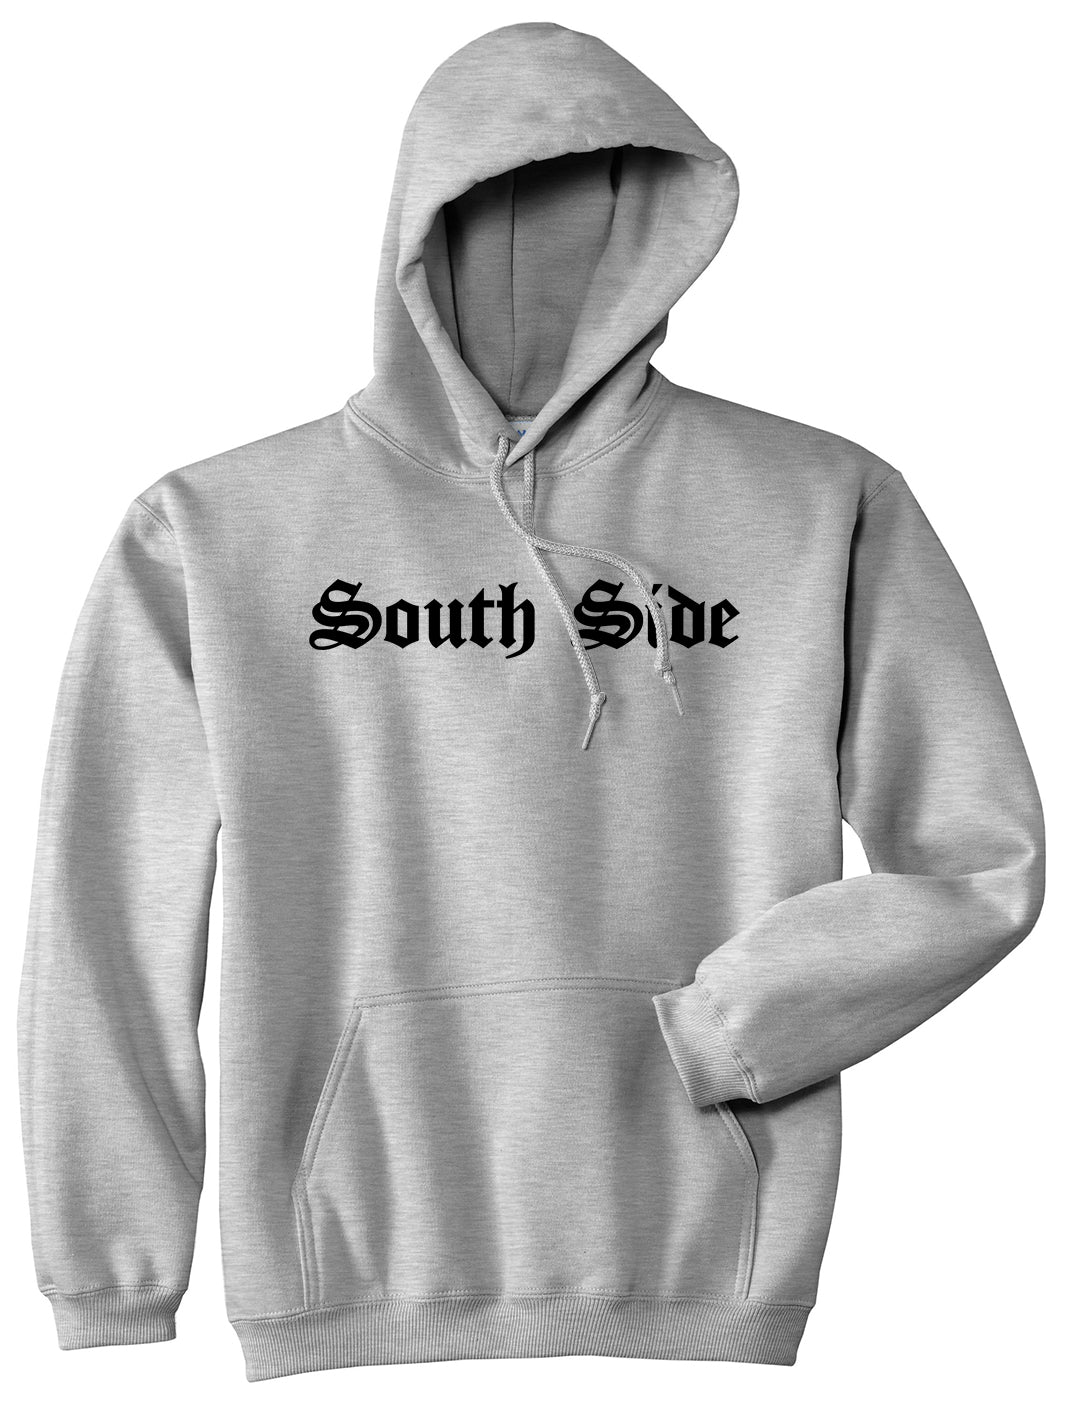 South Side Old English Mens Pullover Hoodie Grey